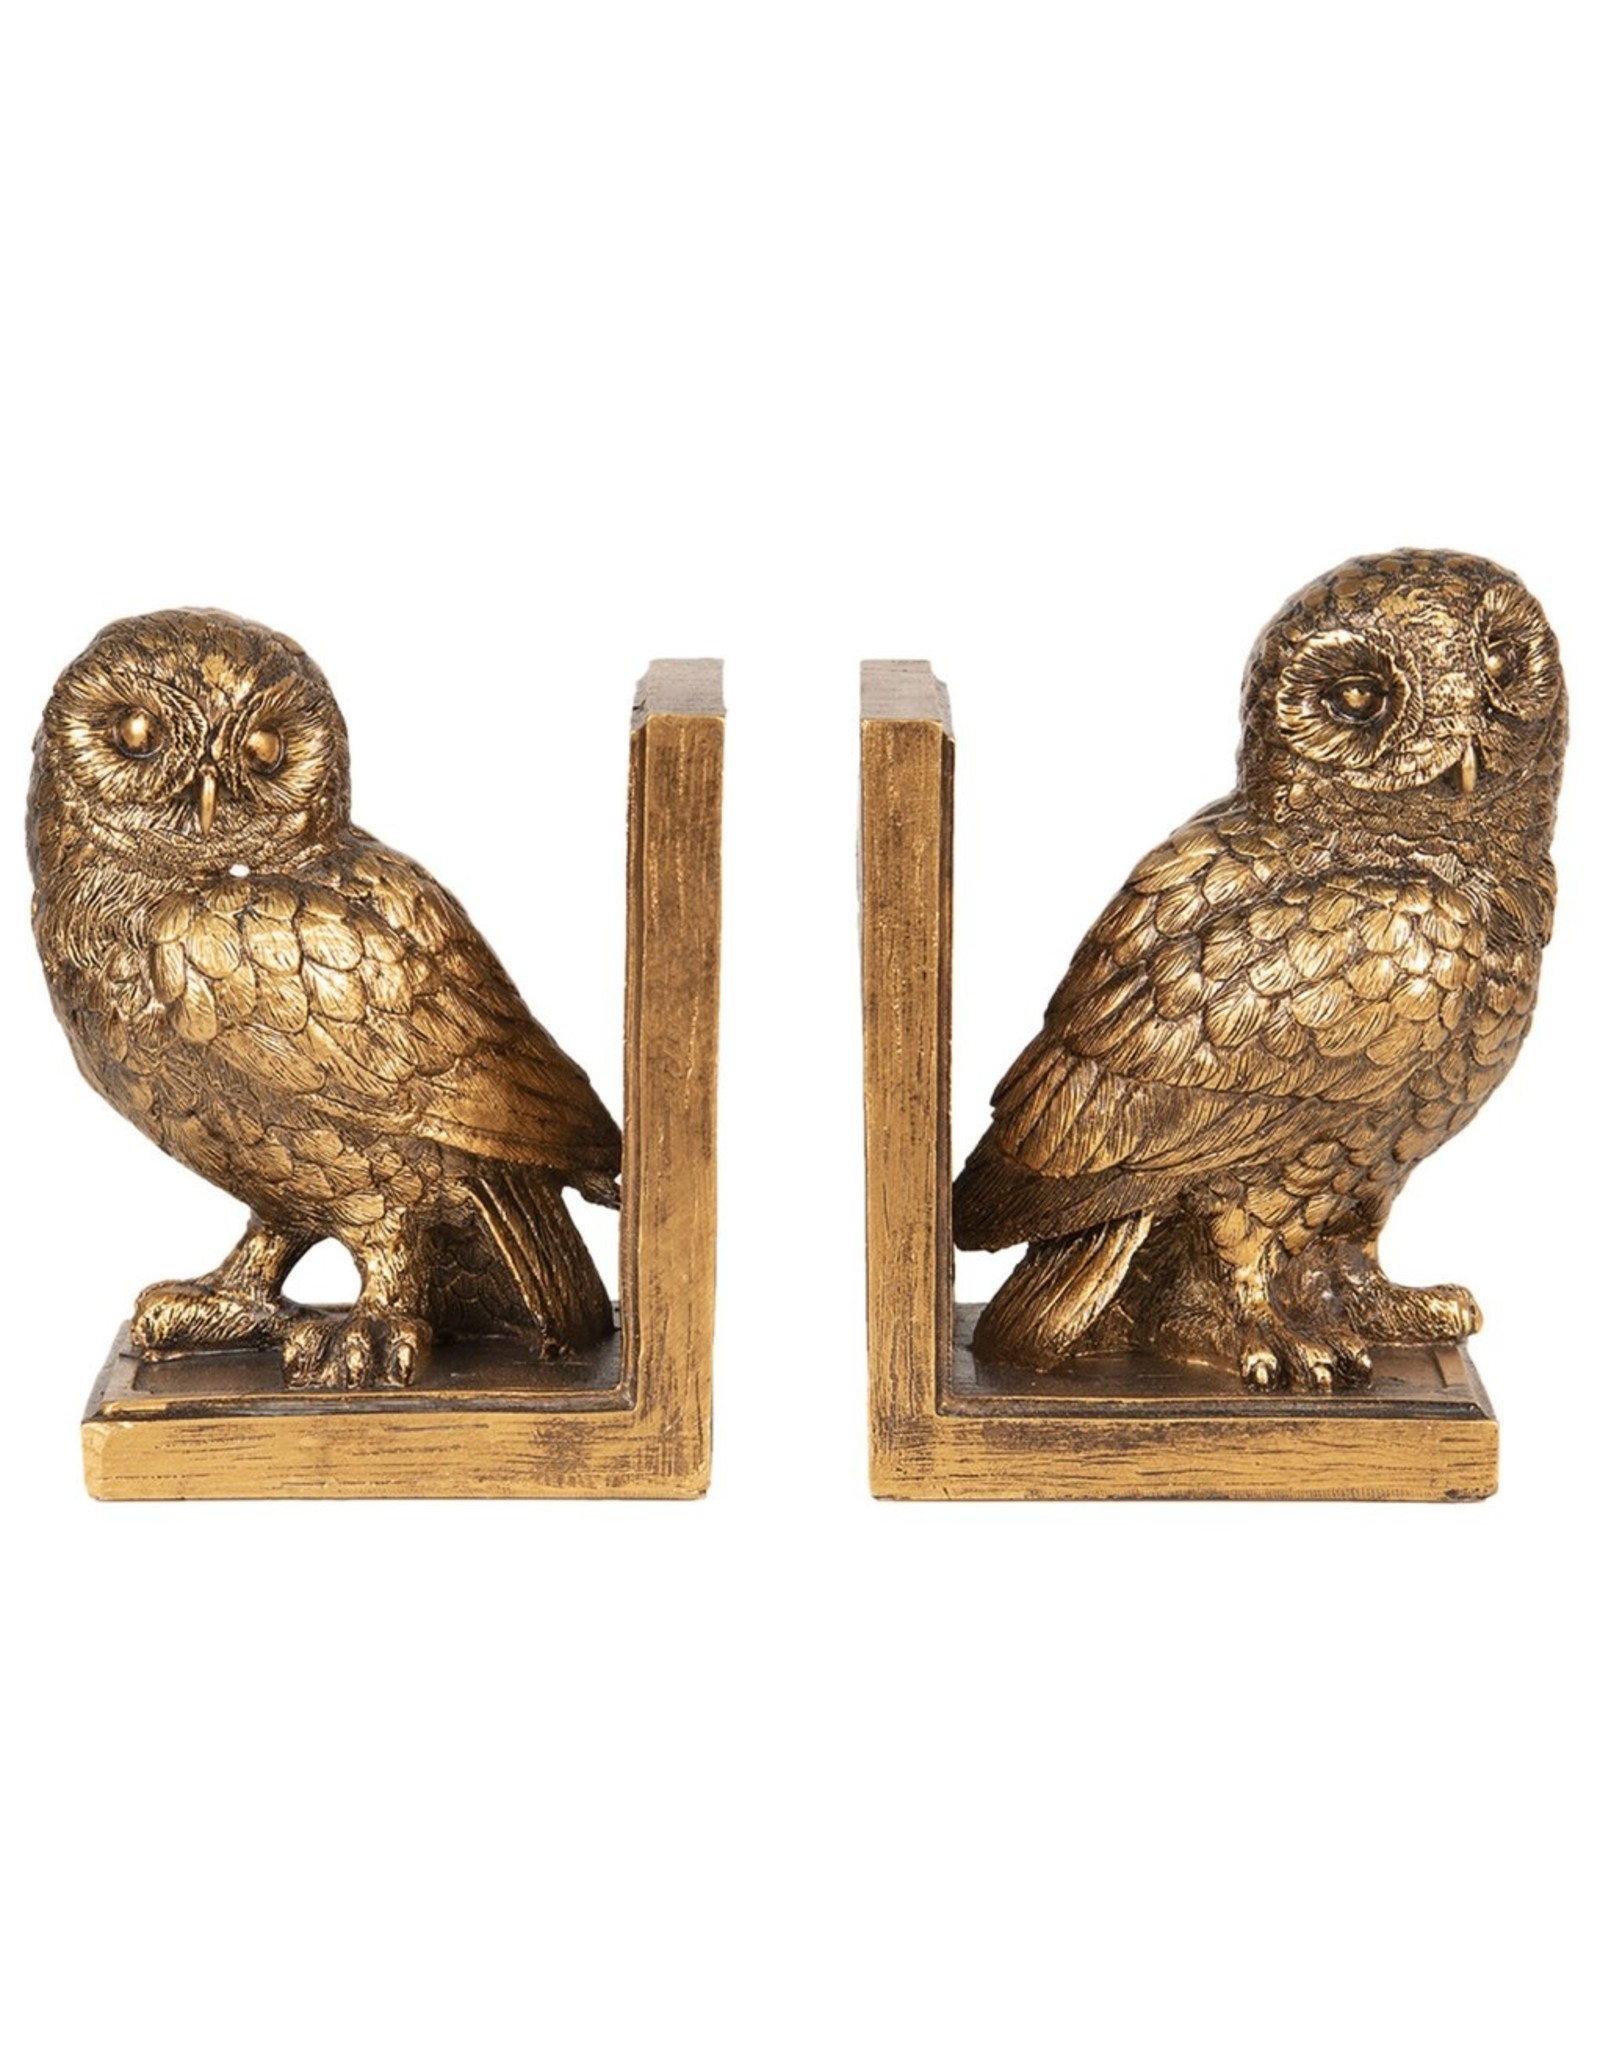 C&E Miscellaneous - Owl Bookends set of 2, gold colored